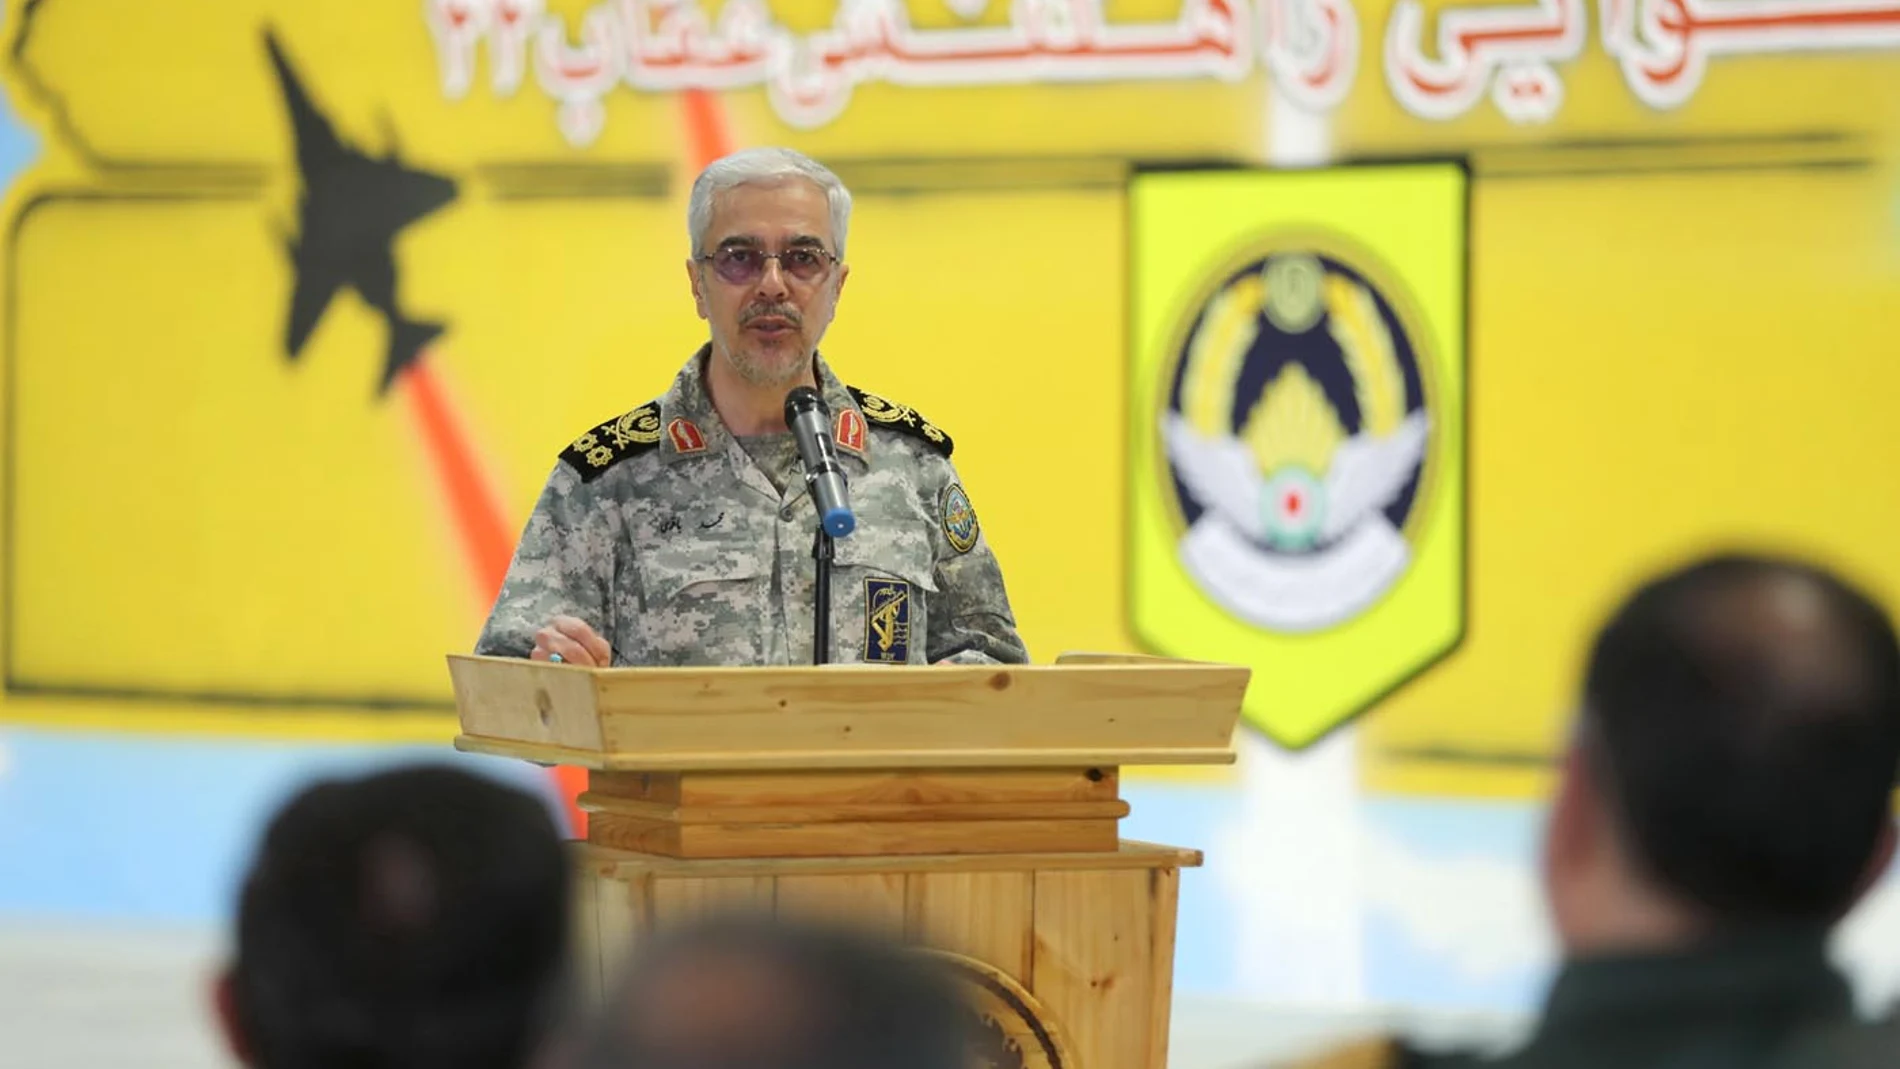 February 7, 2023, undisclosed, undisclosed, Iran: A handout picture provided by the Iranian Army office on February 7, 2023, shows Armed Forces Chief of Staff Major General MOHAMMAD BAGHERI speaking during visiting Iran's first underground military air base in an undisclosed location. (Foto de ARCHIVO) 07/02/2023